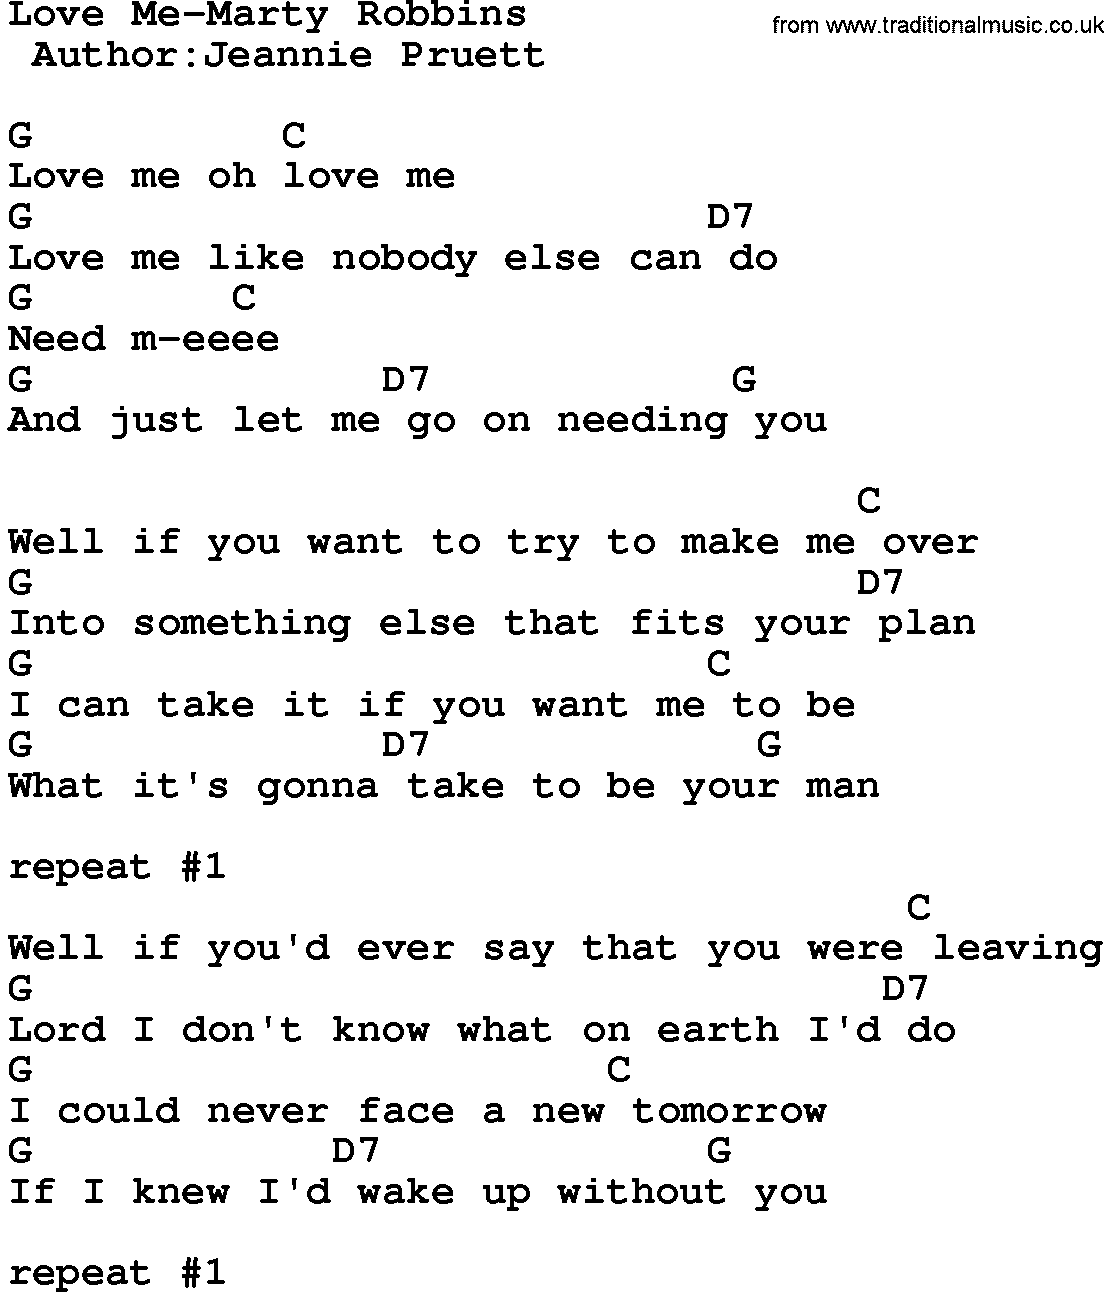 Country music song: Love Me-Marty Robbins lyrics and chords